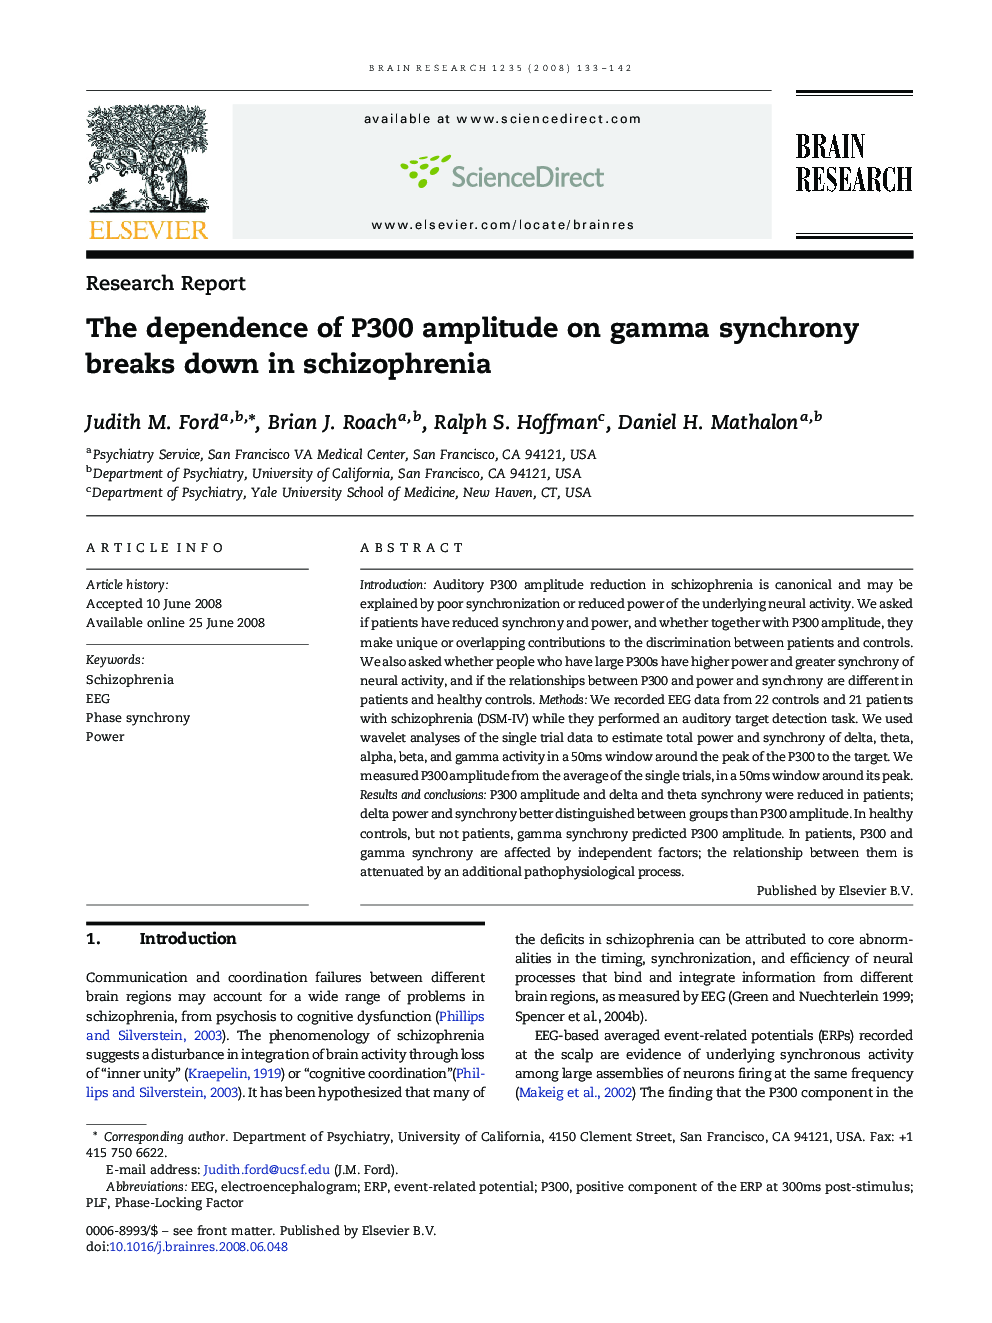 The dependence of P300 amplitude on gamma synchrony breaks down in schizophrenia